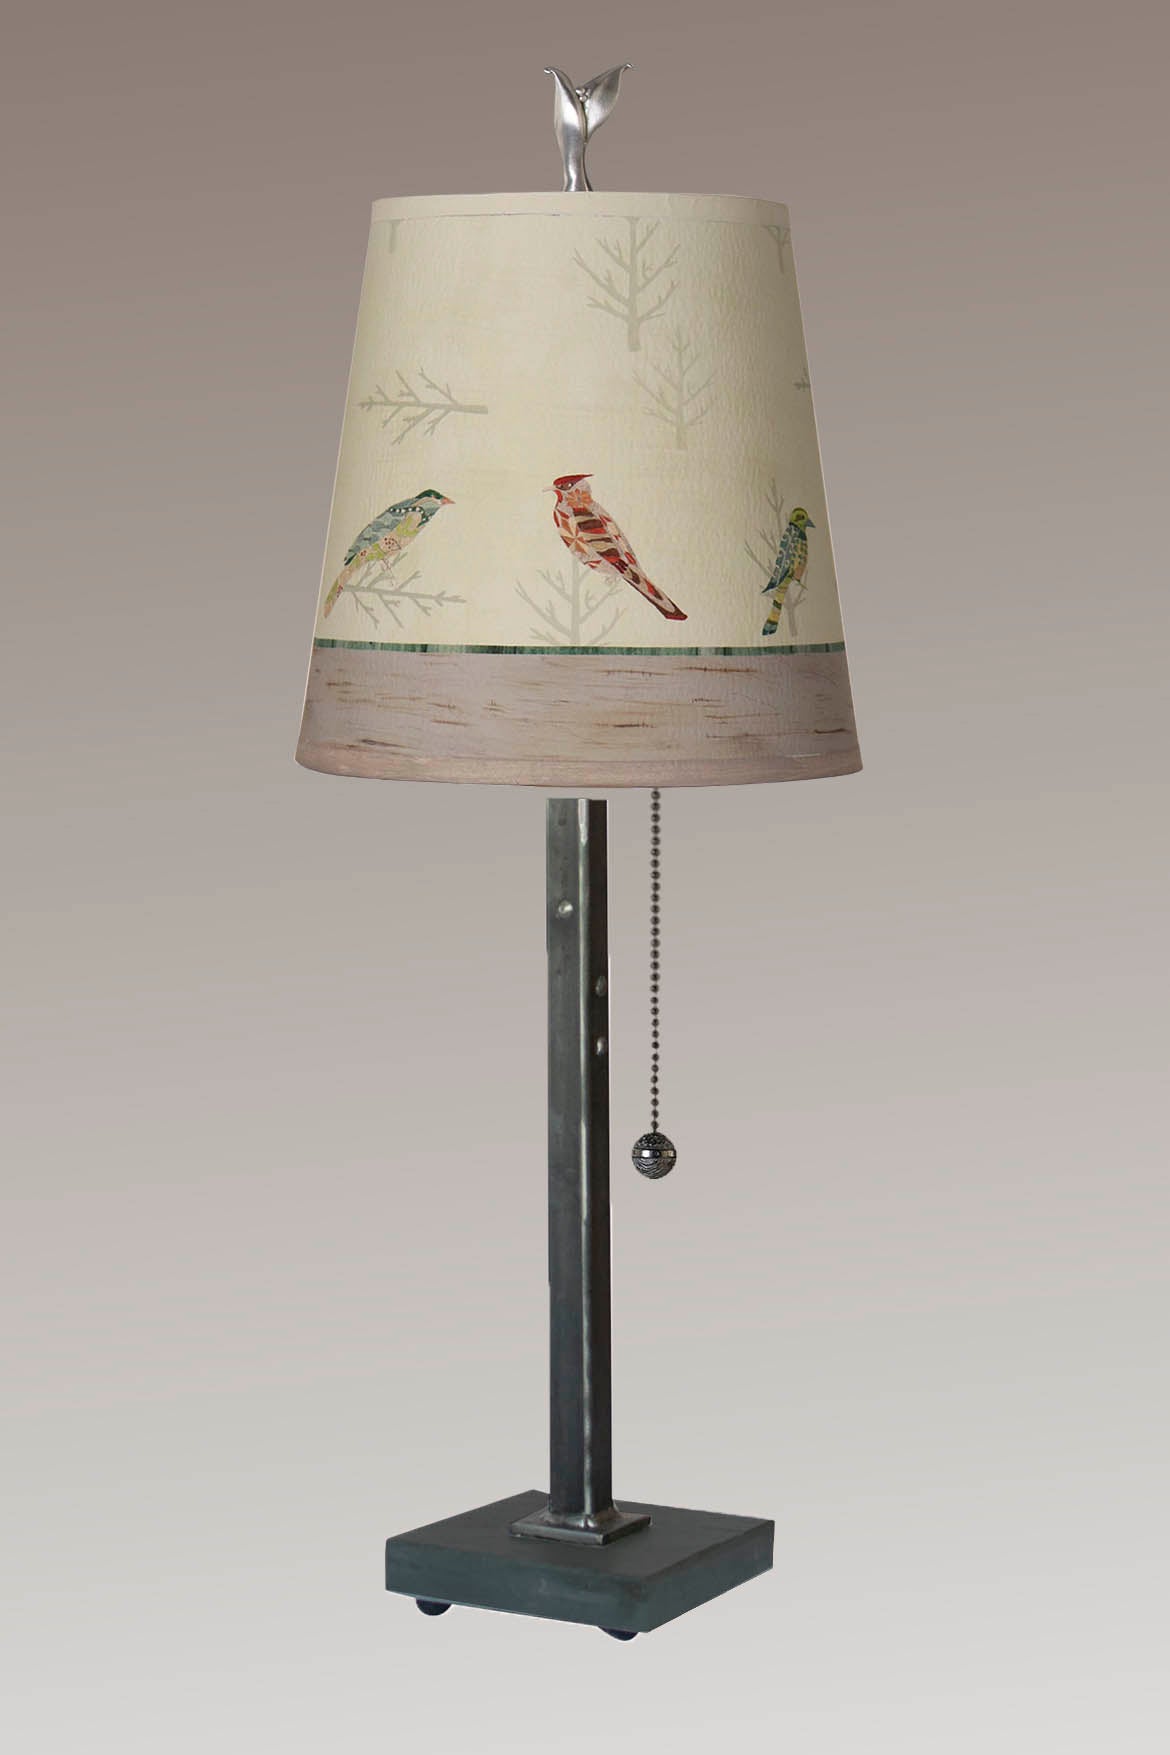 Janna Ugone &amp; Co Table Lamp Steel Table Lamp with Small Drum Shade in Bird Friends